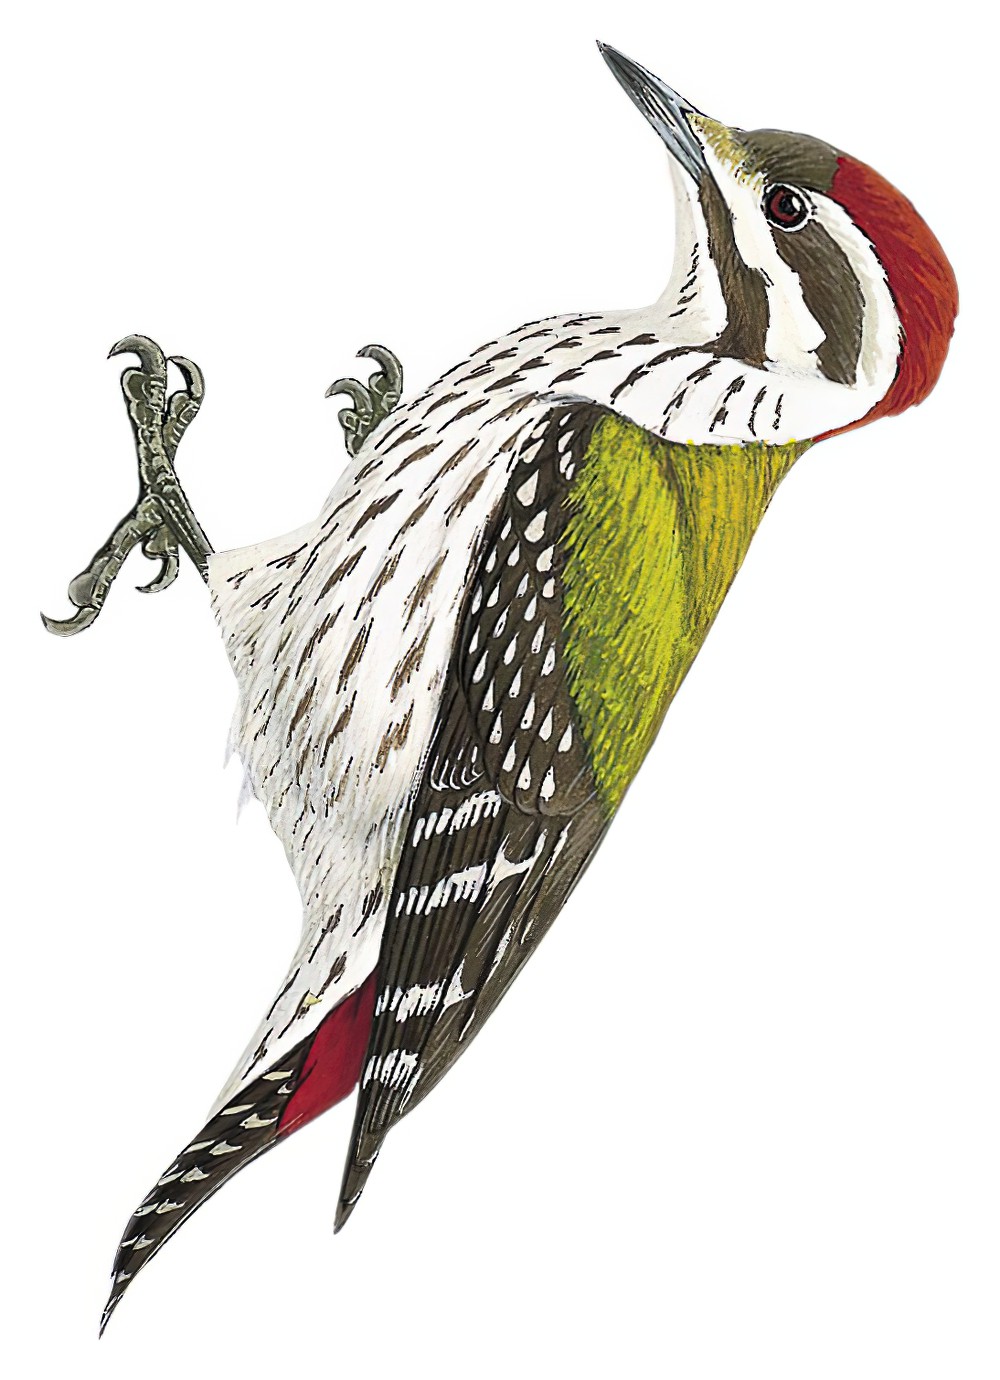 Abyssinian Woodpecker / Chloropicus abyssinicus